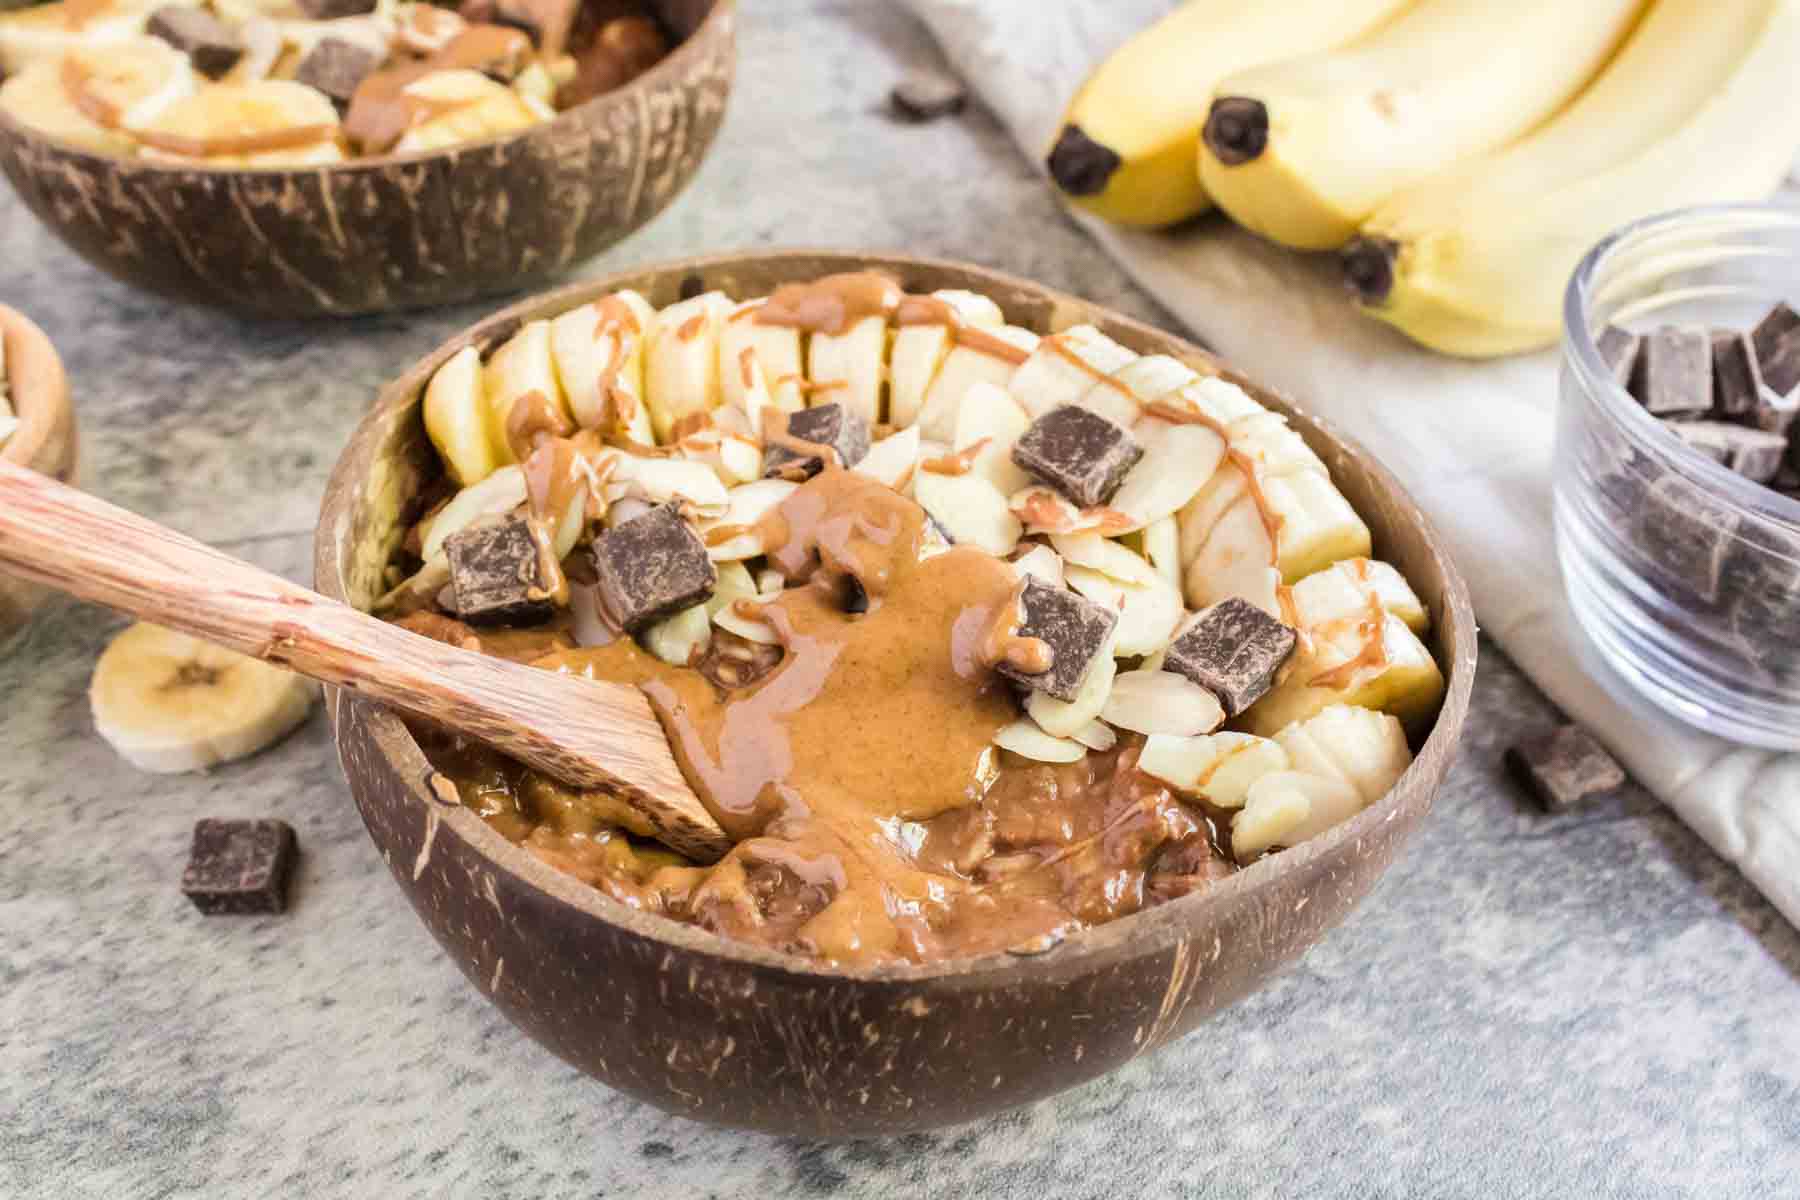 A heaping bowl full of chocolate oatmeal with various toppings.